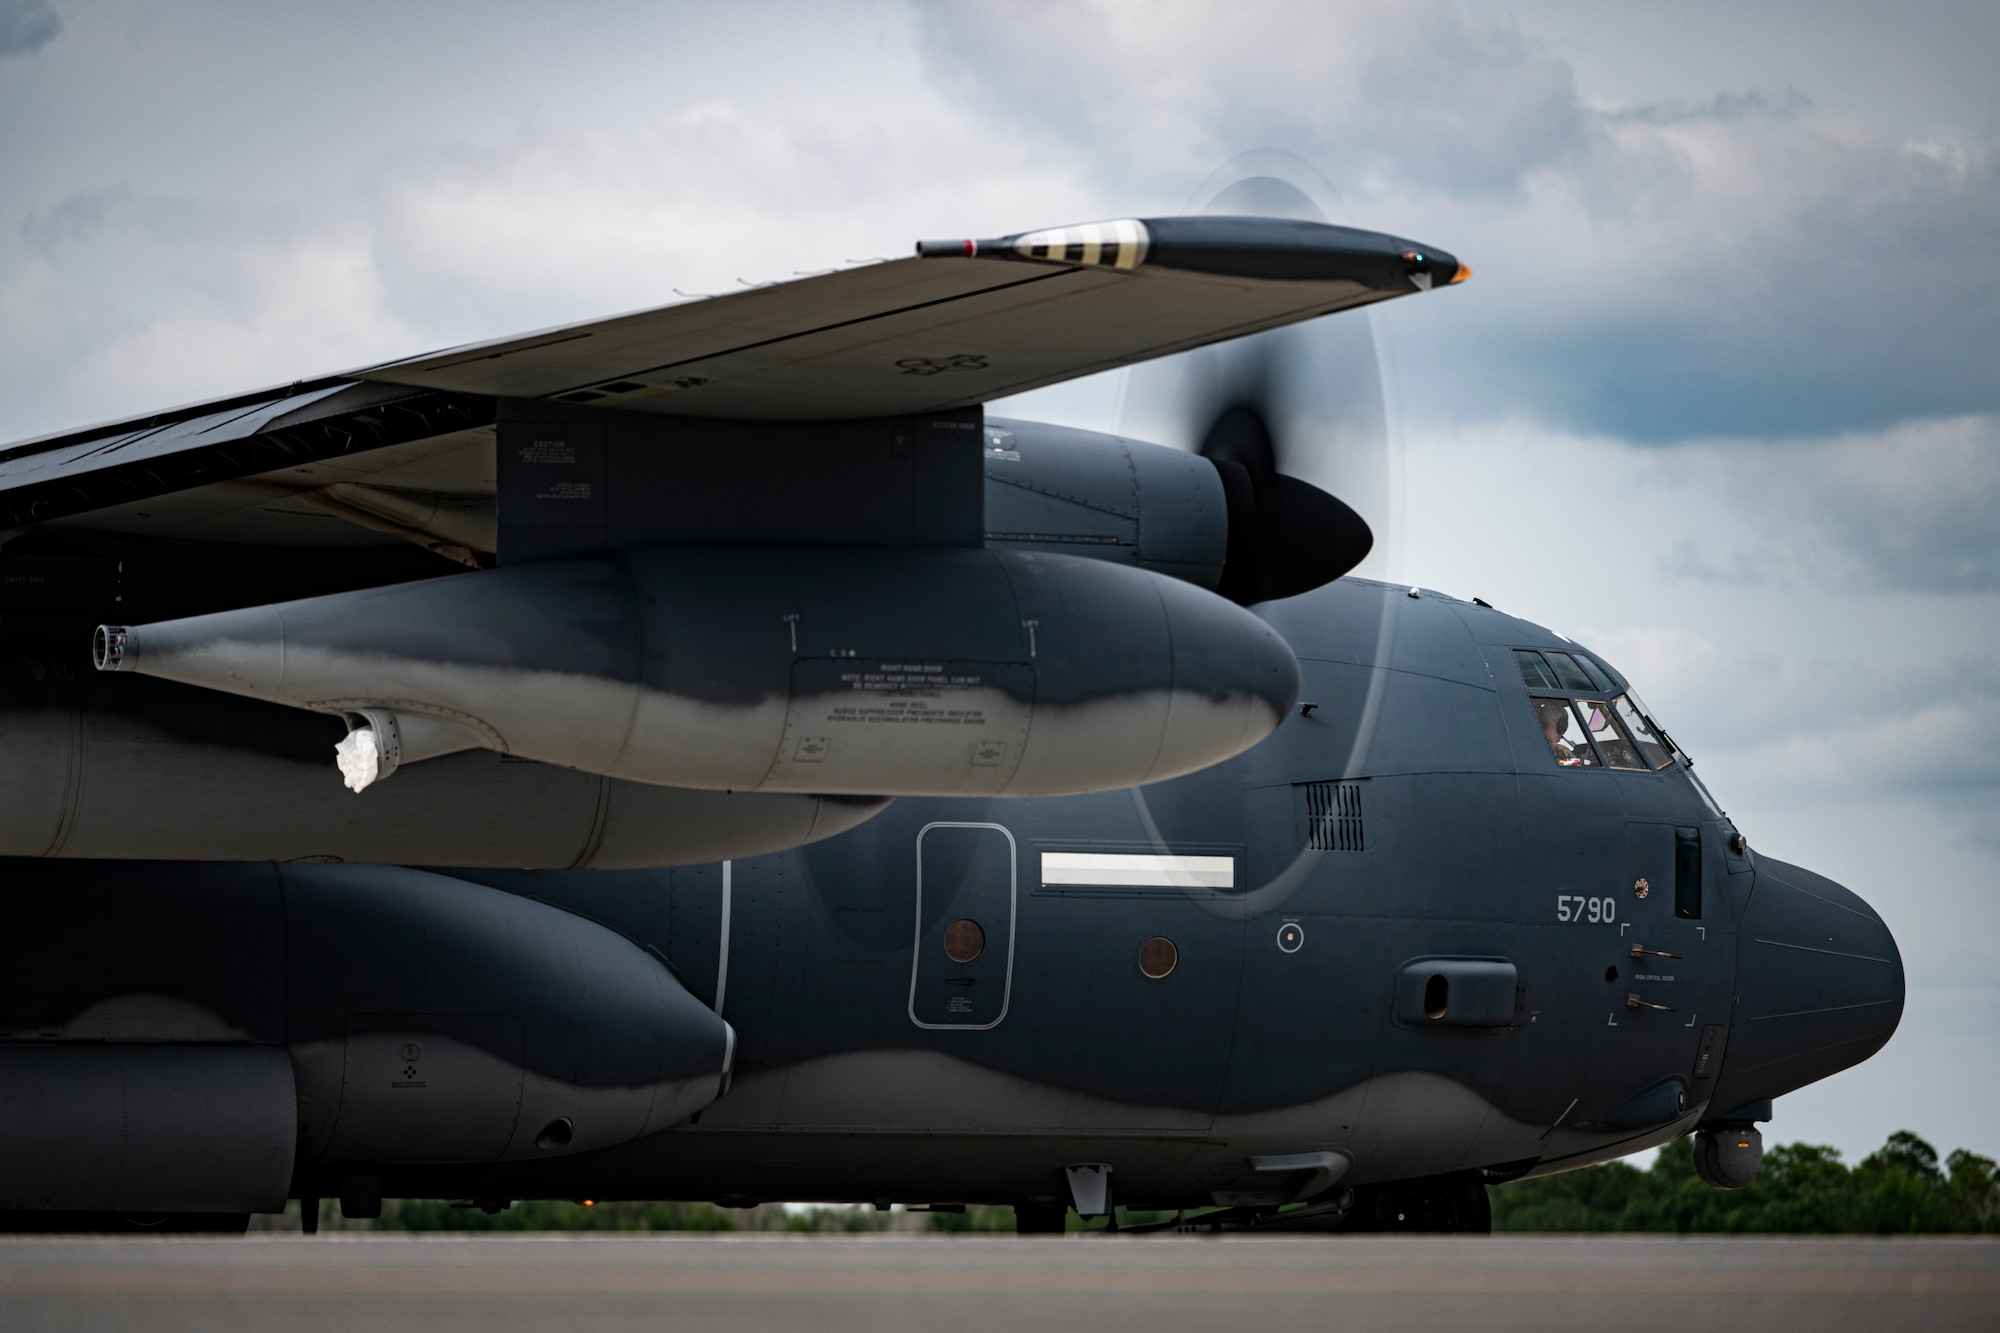 U.S. Air Force pilots assigned to the 71st Rescue Squadron park an HC-130J Combat King II for a personnel and cargo offload at Avon Park Air Force Range, Florida, April 9, 2024. Airmen forward deployed to Avon Park to participate in exercise Ready Tiger 24-1, establishing an airfield in a simulated austere environment. During Ready Tiger 24-1, exercise inspectors will assess the 23rd Wing's proficiency in employing decentralized command and control to fulfill air tasking orders across geographically dispersed areas amid communication challenges, integrating Agile Combat Employment principles such as integrated combat turns, forward aerial refueling points, multi-capable Airmen, and combat search and rescue capabilities. (U.S. Air Force photo by Tech. Sgt. Devin Boyer)